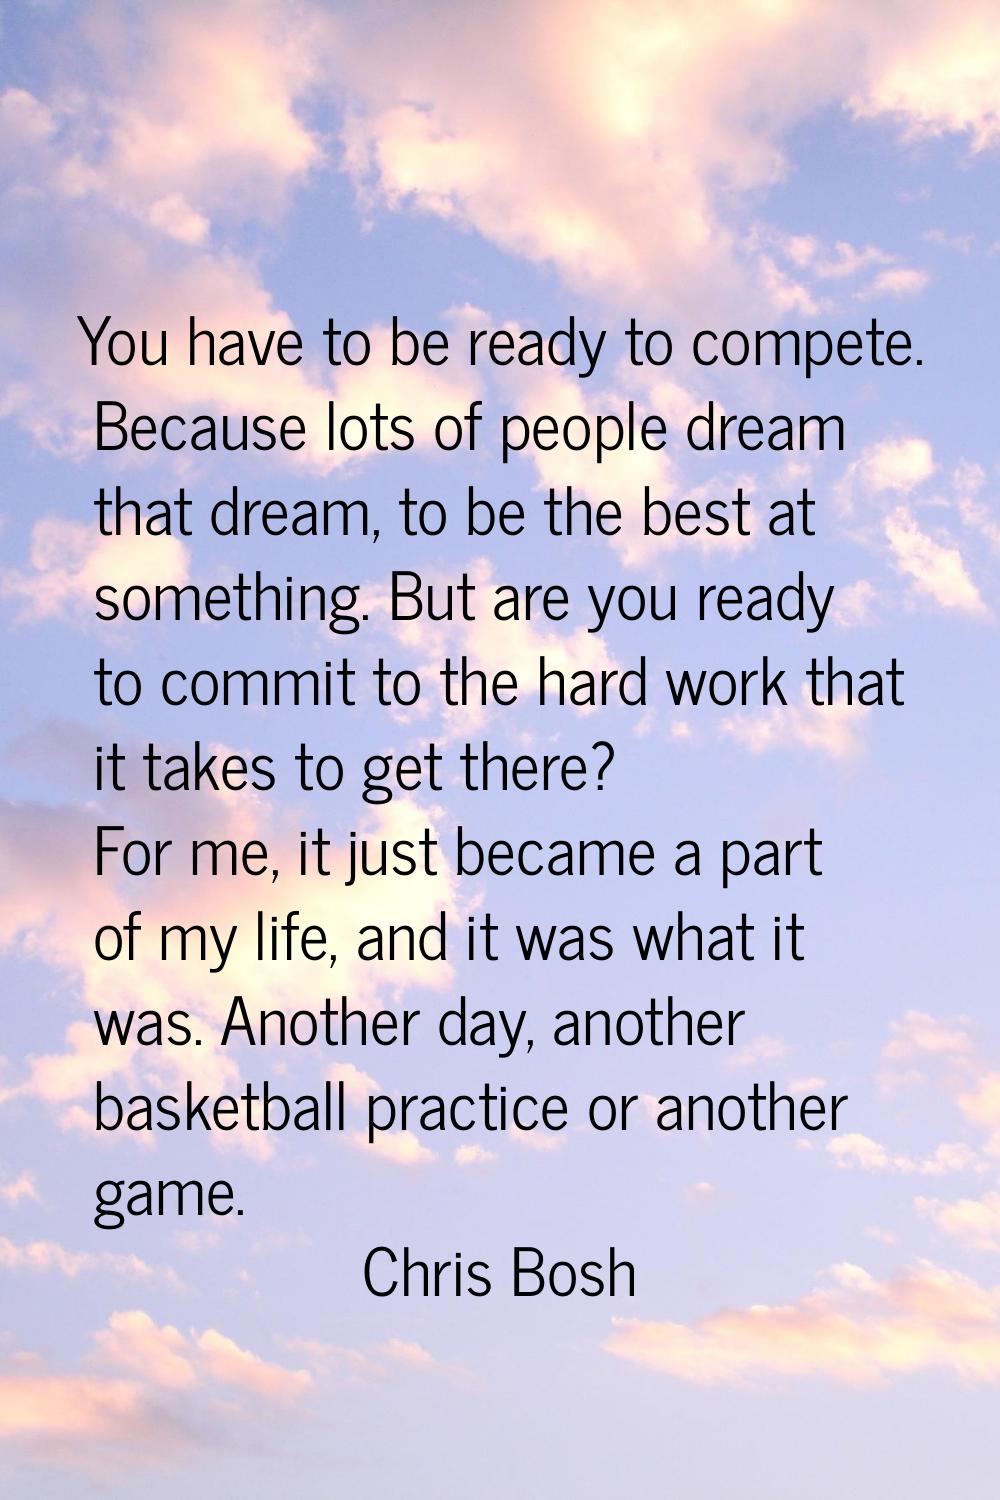 You have to be ready to compete. Because lots of people dream that dream, to be the best at somethi